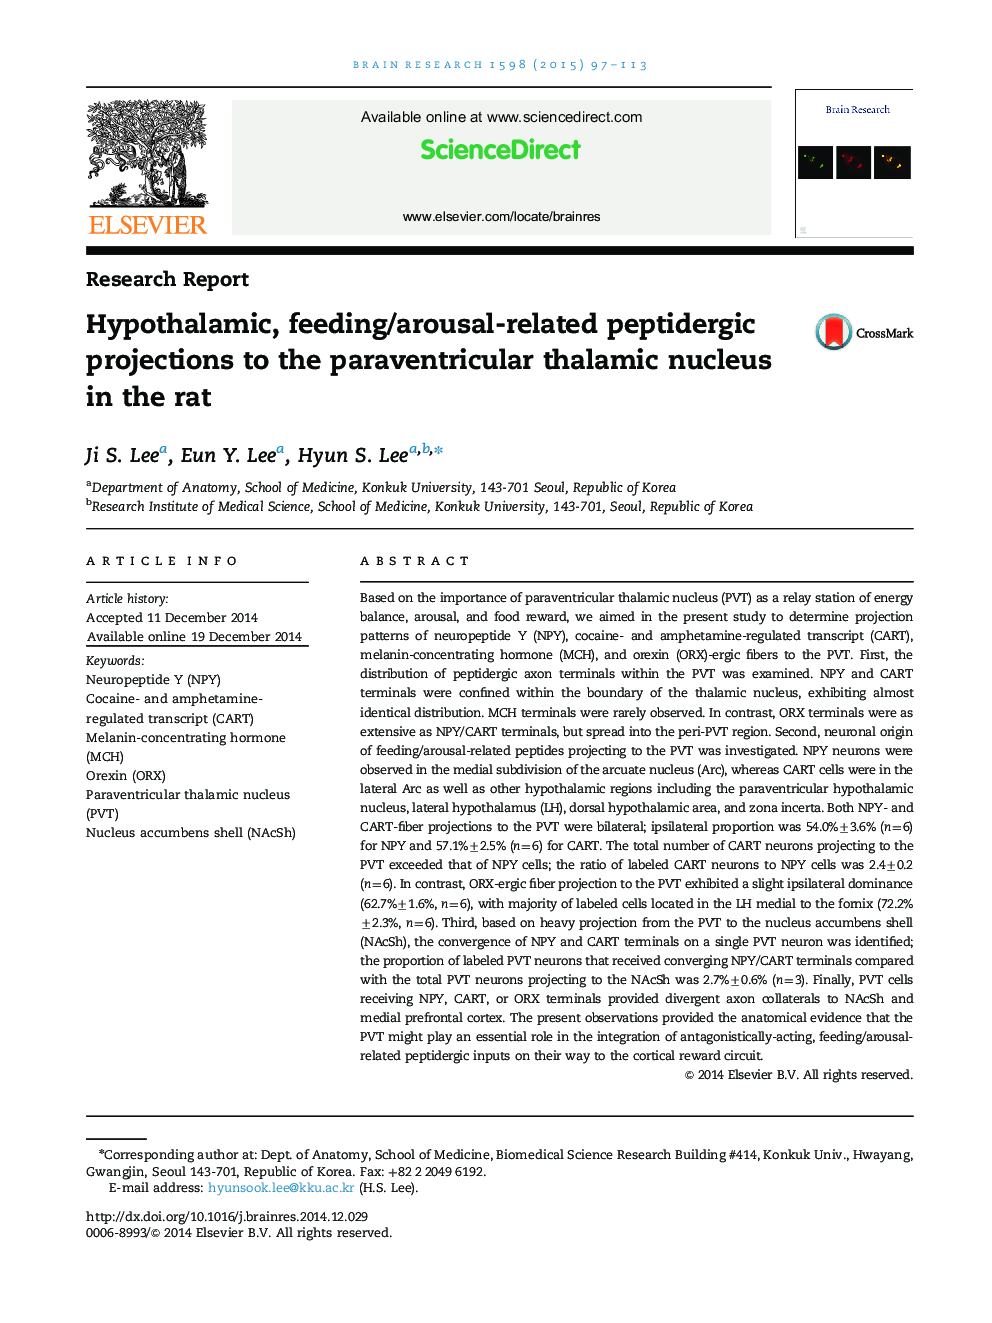 Hypothalamic, feeding/arousal-related peptidergic projections to the paraventricular thalamic nucleus in the rat